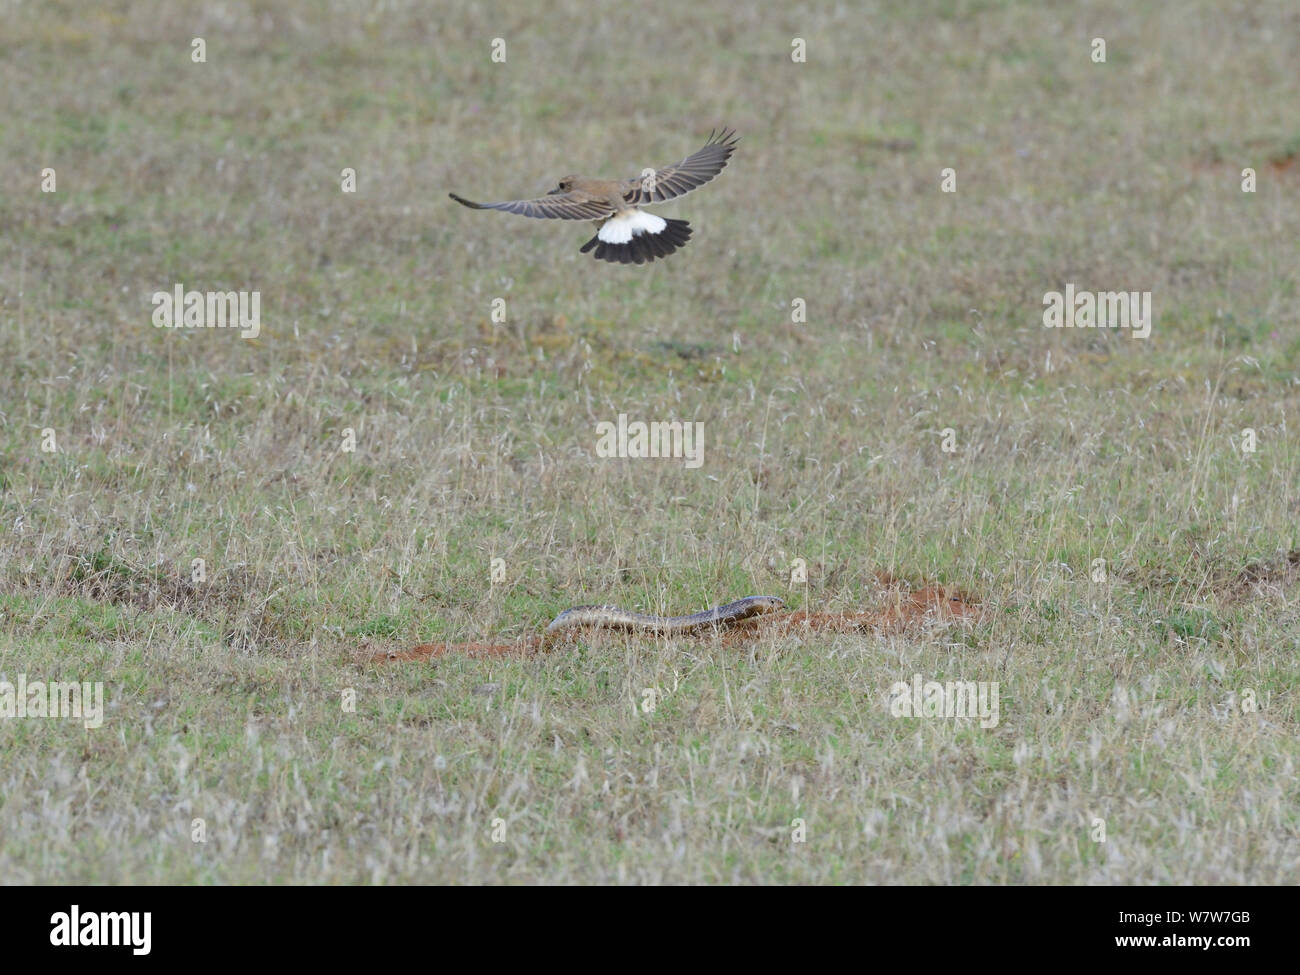 Cape Cobra (Naja nivea) hunting, mobbed by Capped wheatear (Oenanthe pileata) deHoop Nature Reserve, Western Cape, South Africa, December. Stock Photo